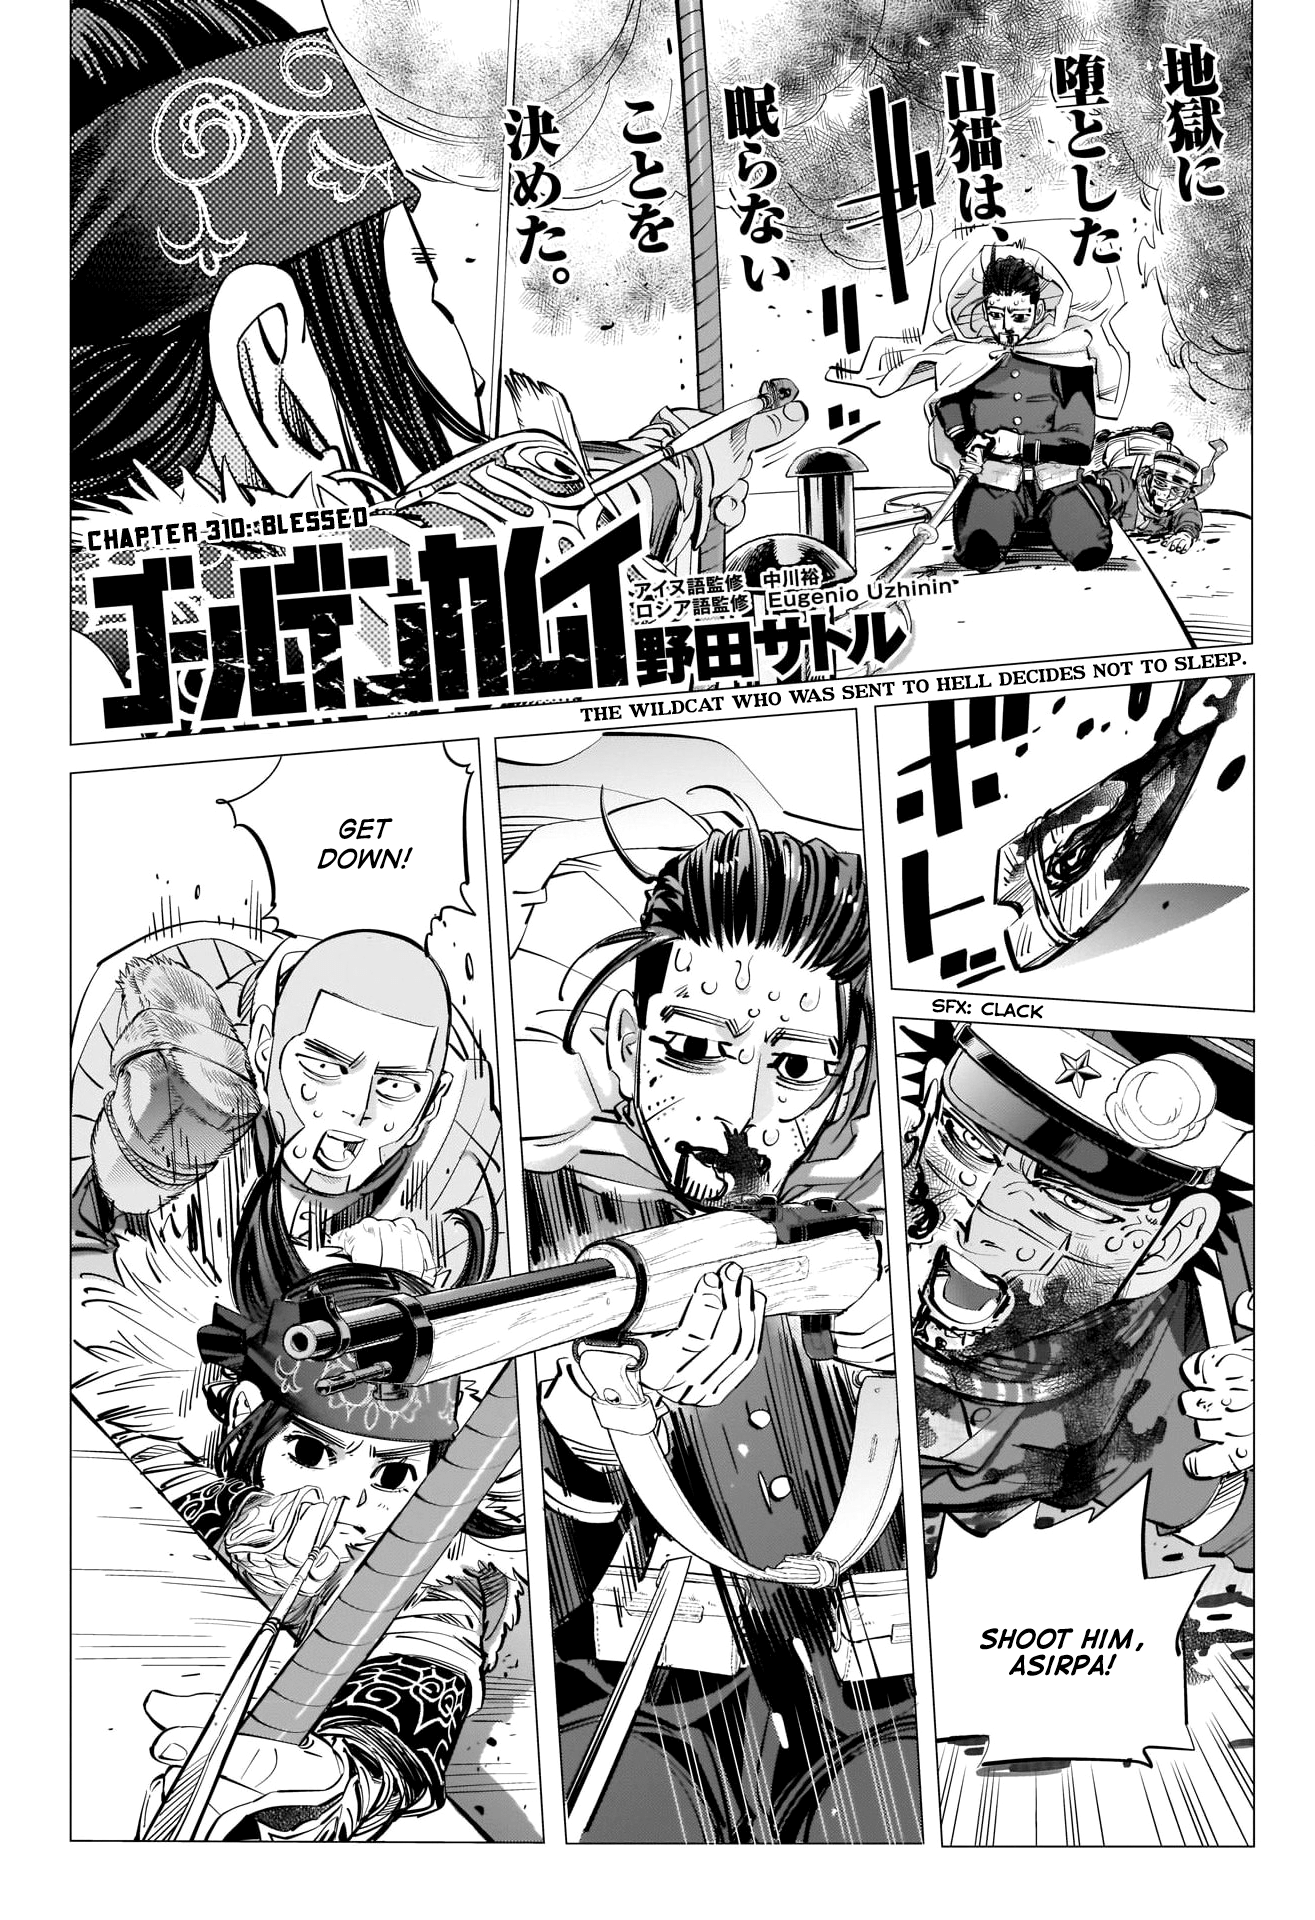 Golden Kamui chapter 310 - page 1